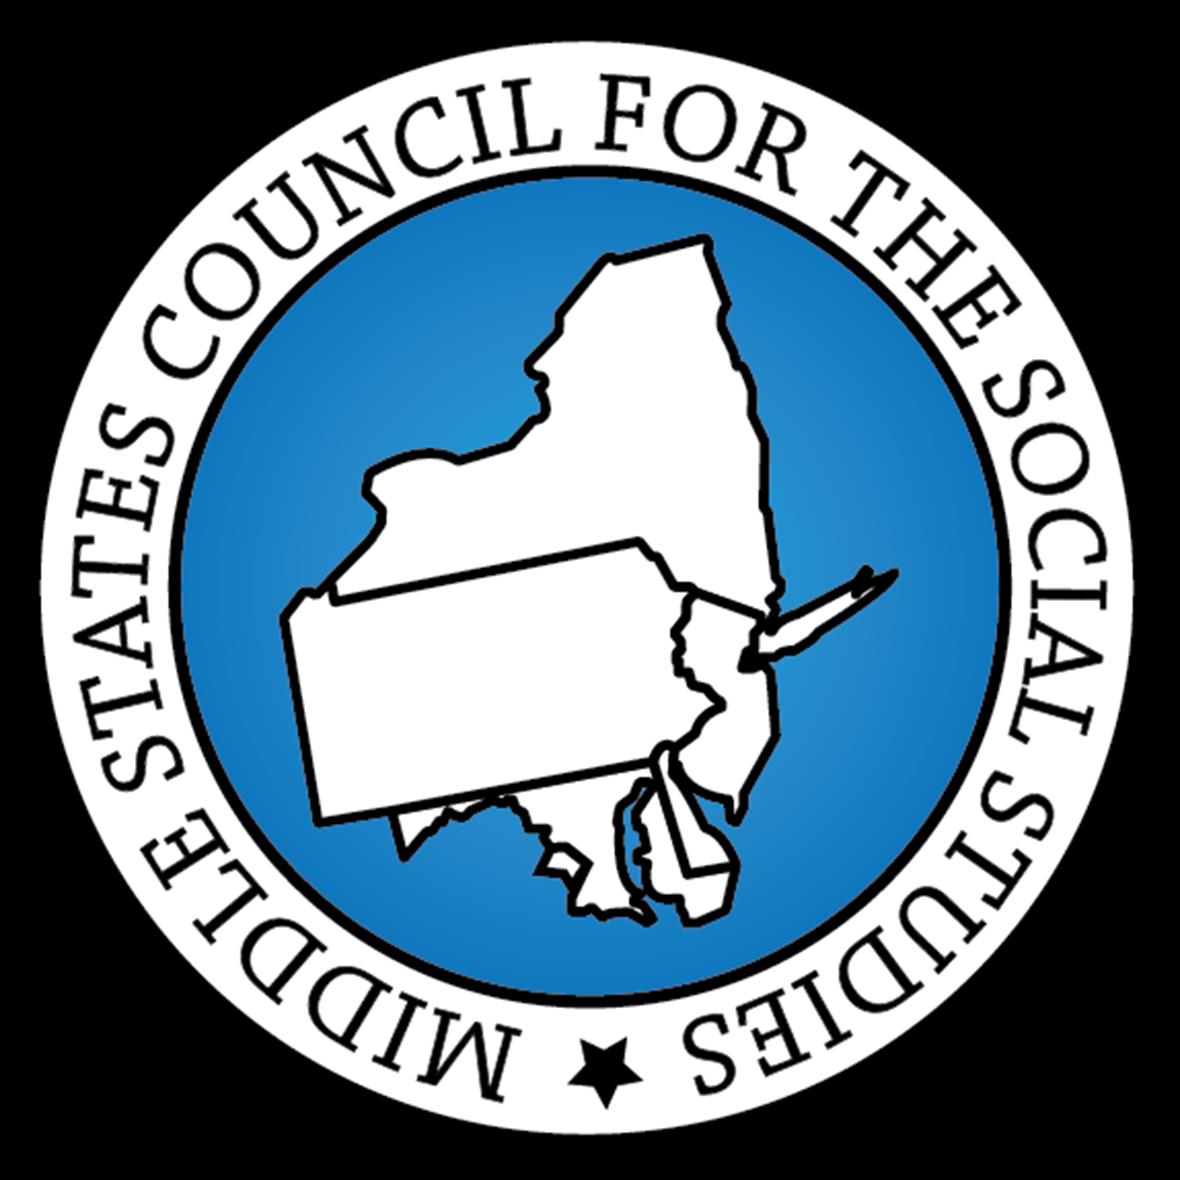 Middle States Council for Social Studies logo; a design showing each state represented surrounded by a seal